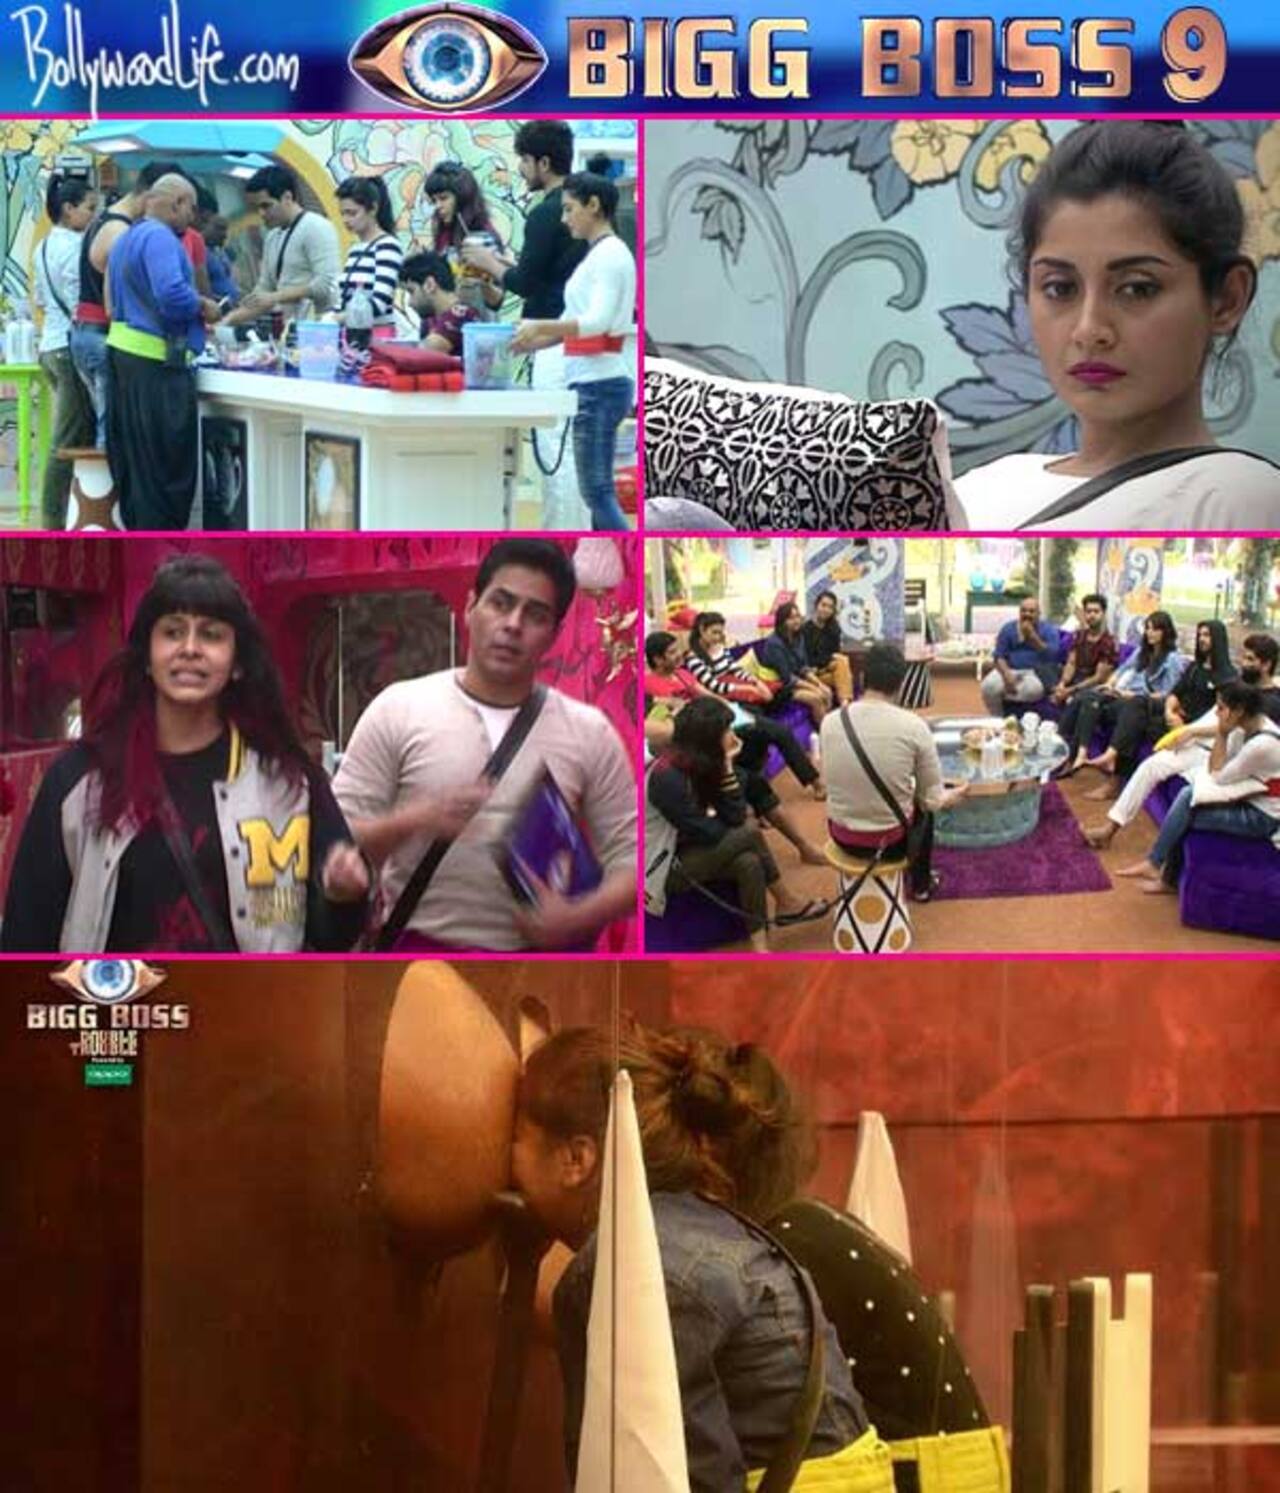 Bigg Boss 9 Episode 2: Roopal Tyagi irritated with ex-flame Ankit Gera, Rimi Sen chickens out after hearing the task and Kishwer Merchantt bitches about Aman Verma on Day 2!